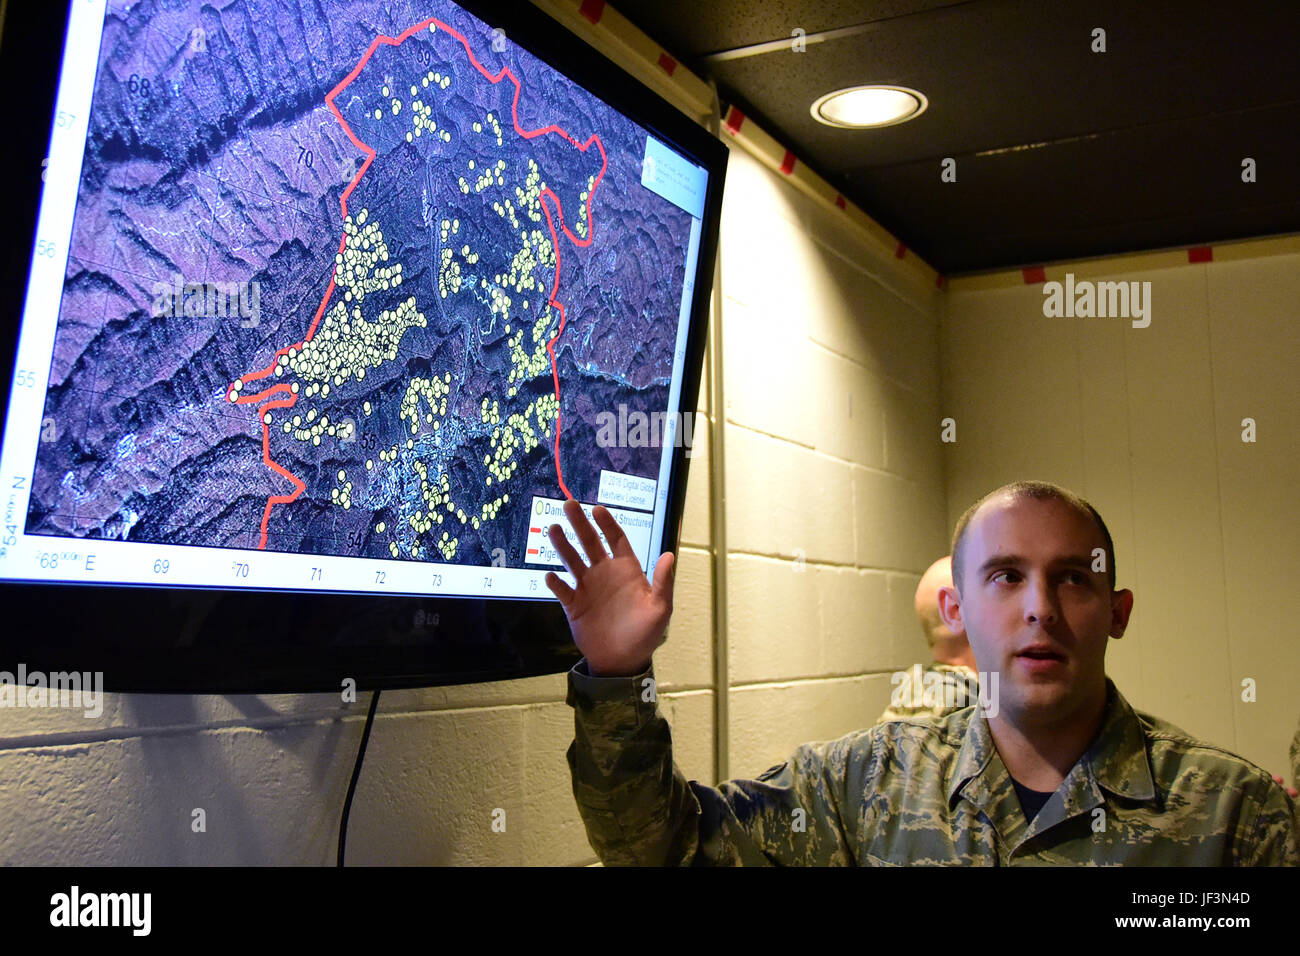 Staff Sgt. Nicholas, a member of the 236th Intelligence Support, presents a map of the wild fires in east Tennessee on Jan. 7, 2017 a Berry Field Air National Guard base in Nashville, TN. The 236th IS provided valuable imagery and mapping support to the Tennessee Emergency Management Agency and other civilian agencies fighting the fires. (U.S. Air National Guard photo by Senior Airman Anthony Agosti) Stock Photo